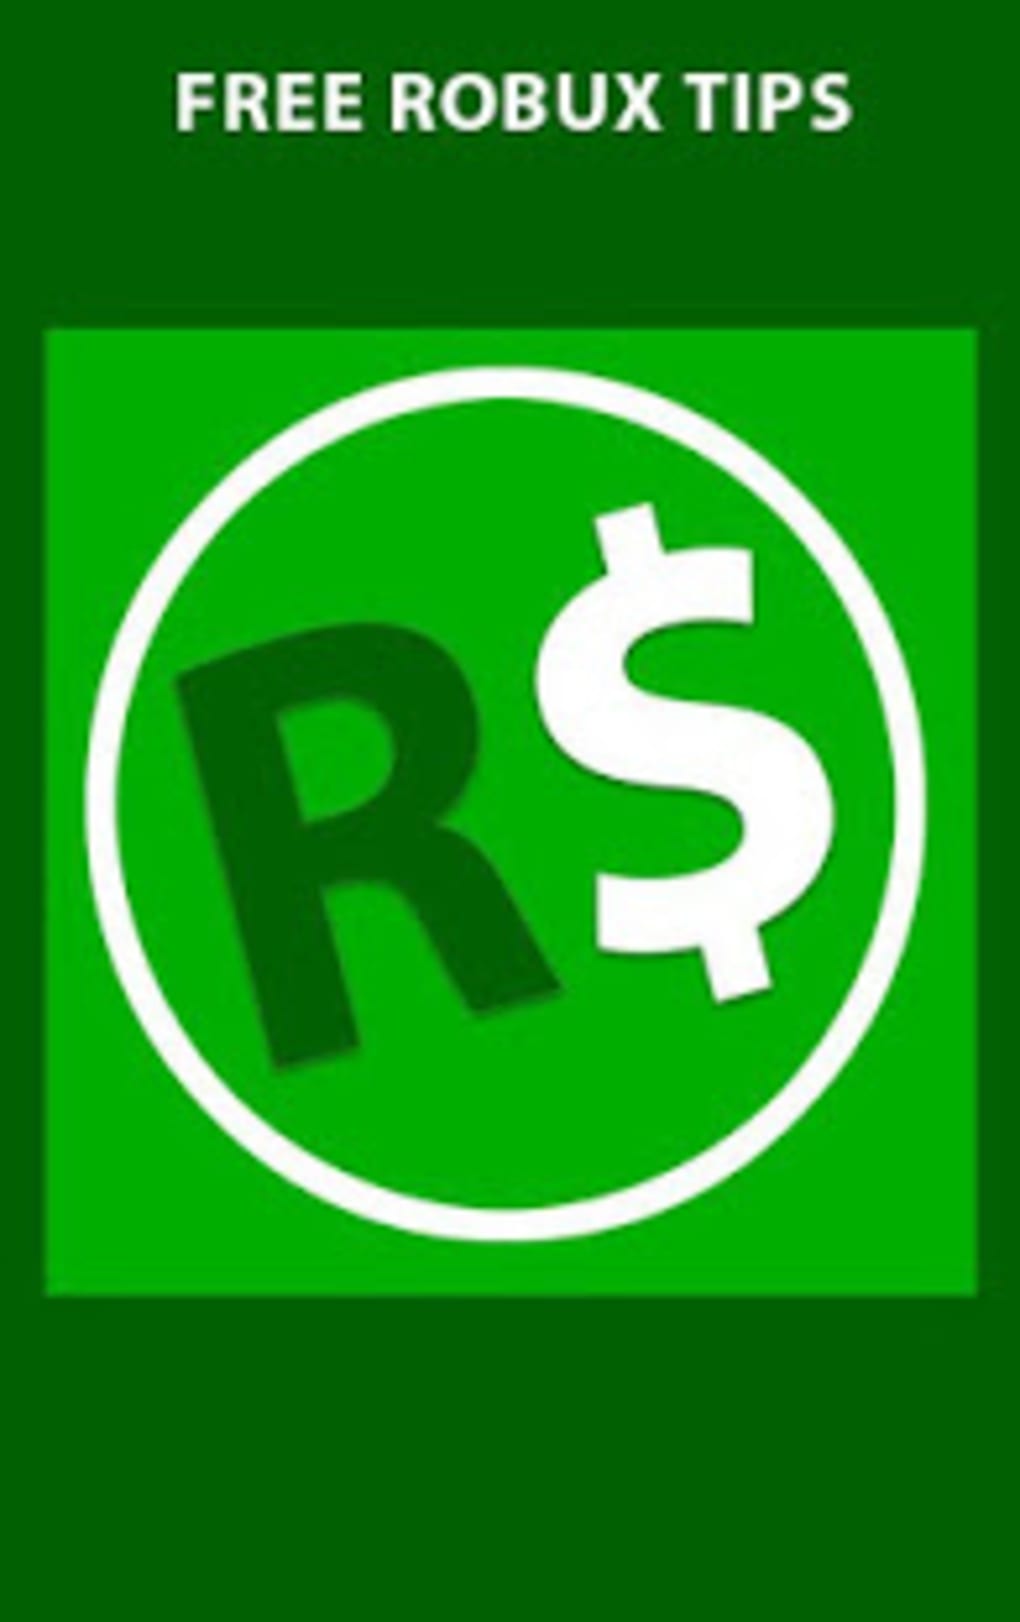 Free Robux Lucky Patcher - robloxgainer. com